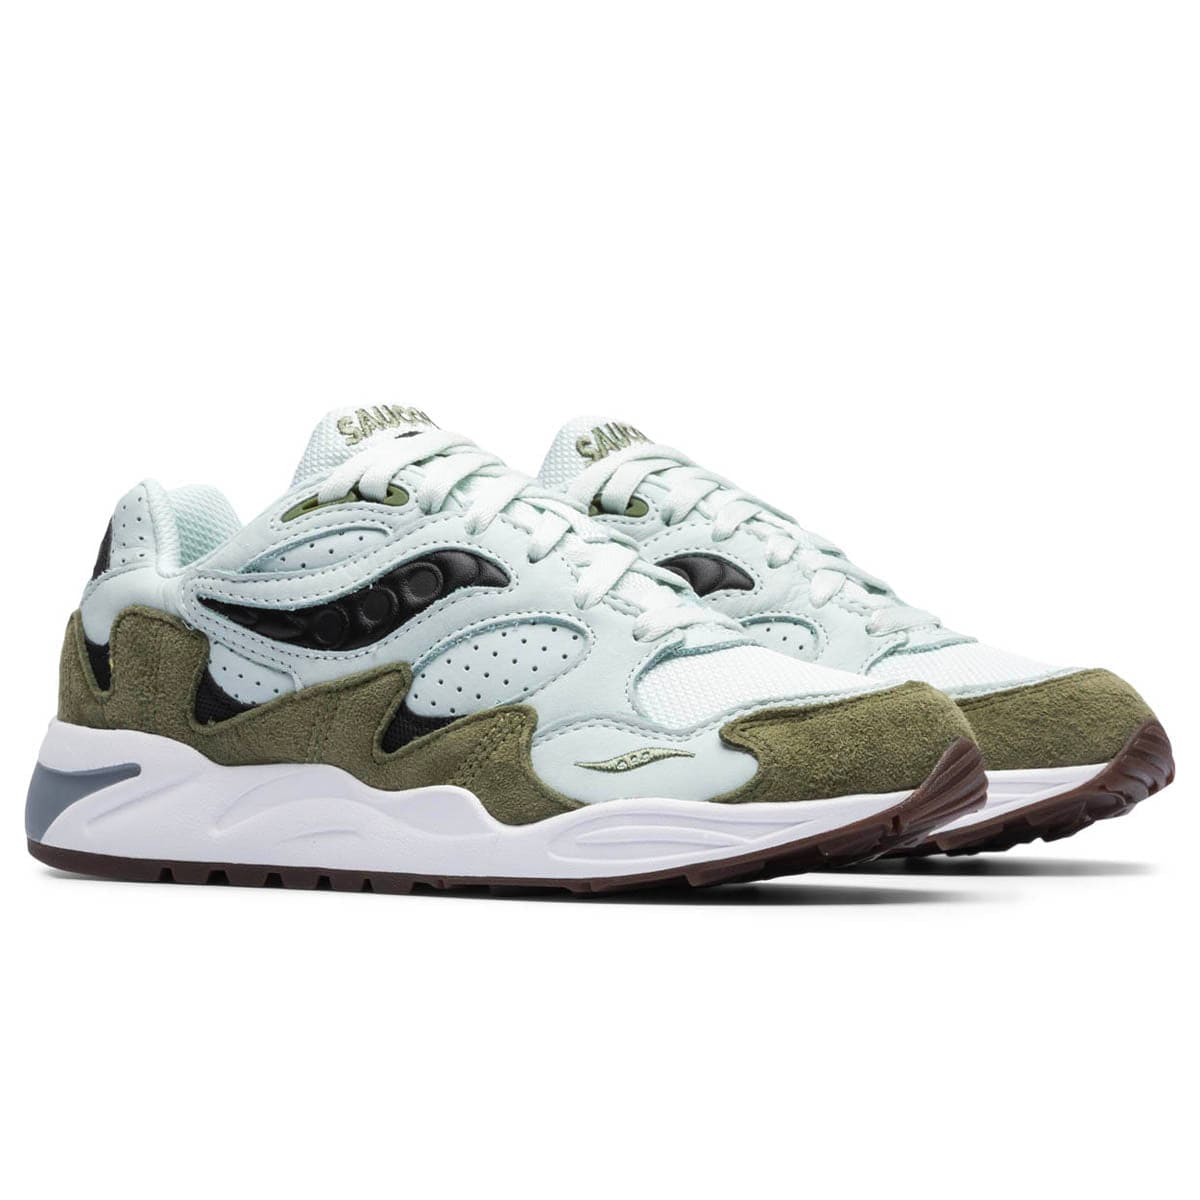 Saucony Sneakers GRID SHADOW 2